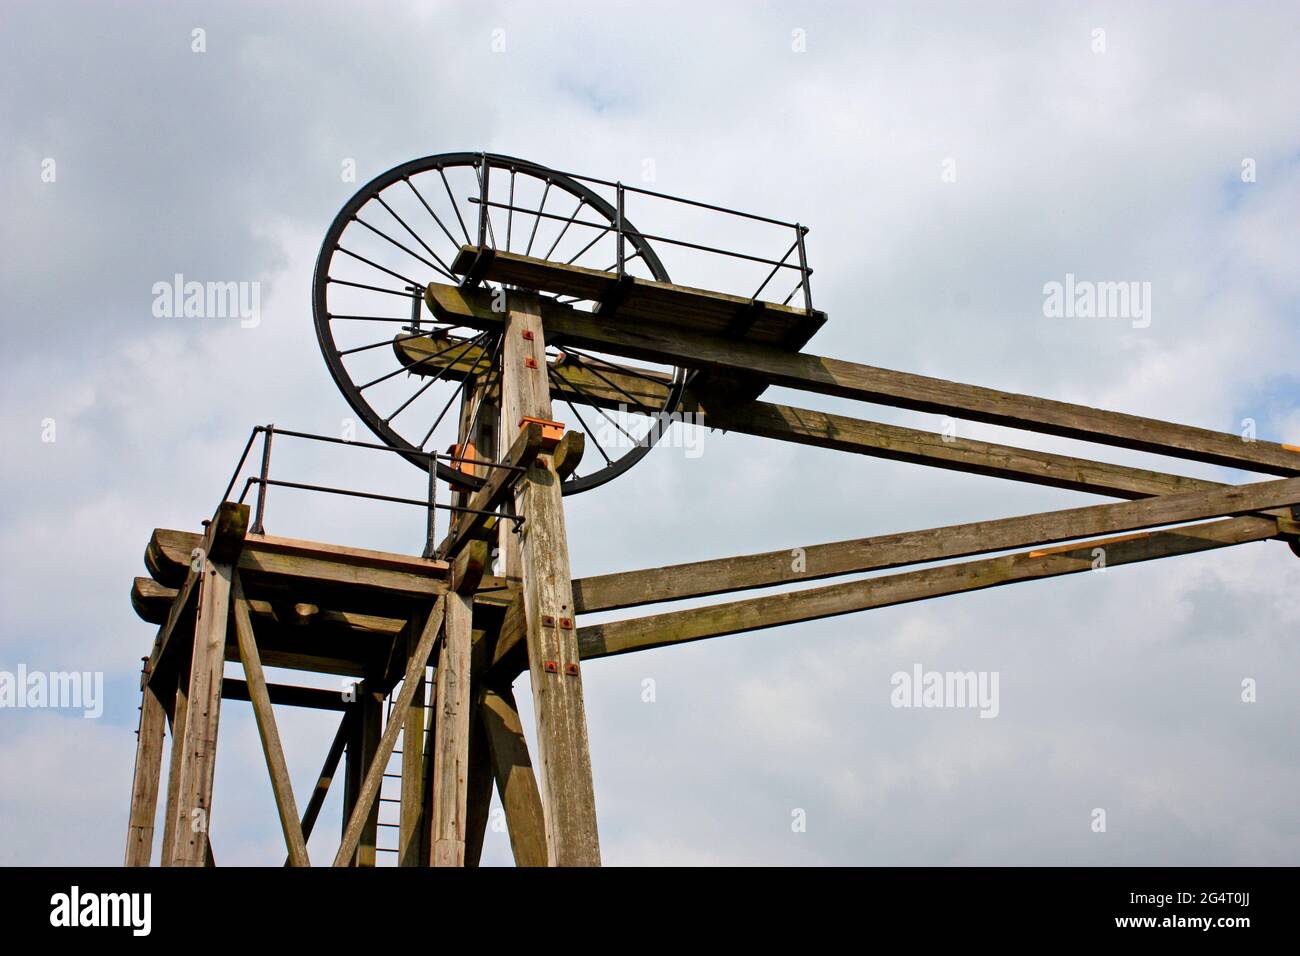 The Top of a Set of Wooden Coal Mining Headstocks. Stock Photo